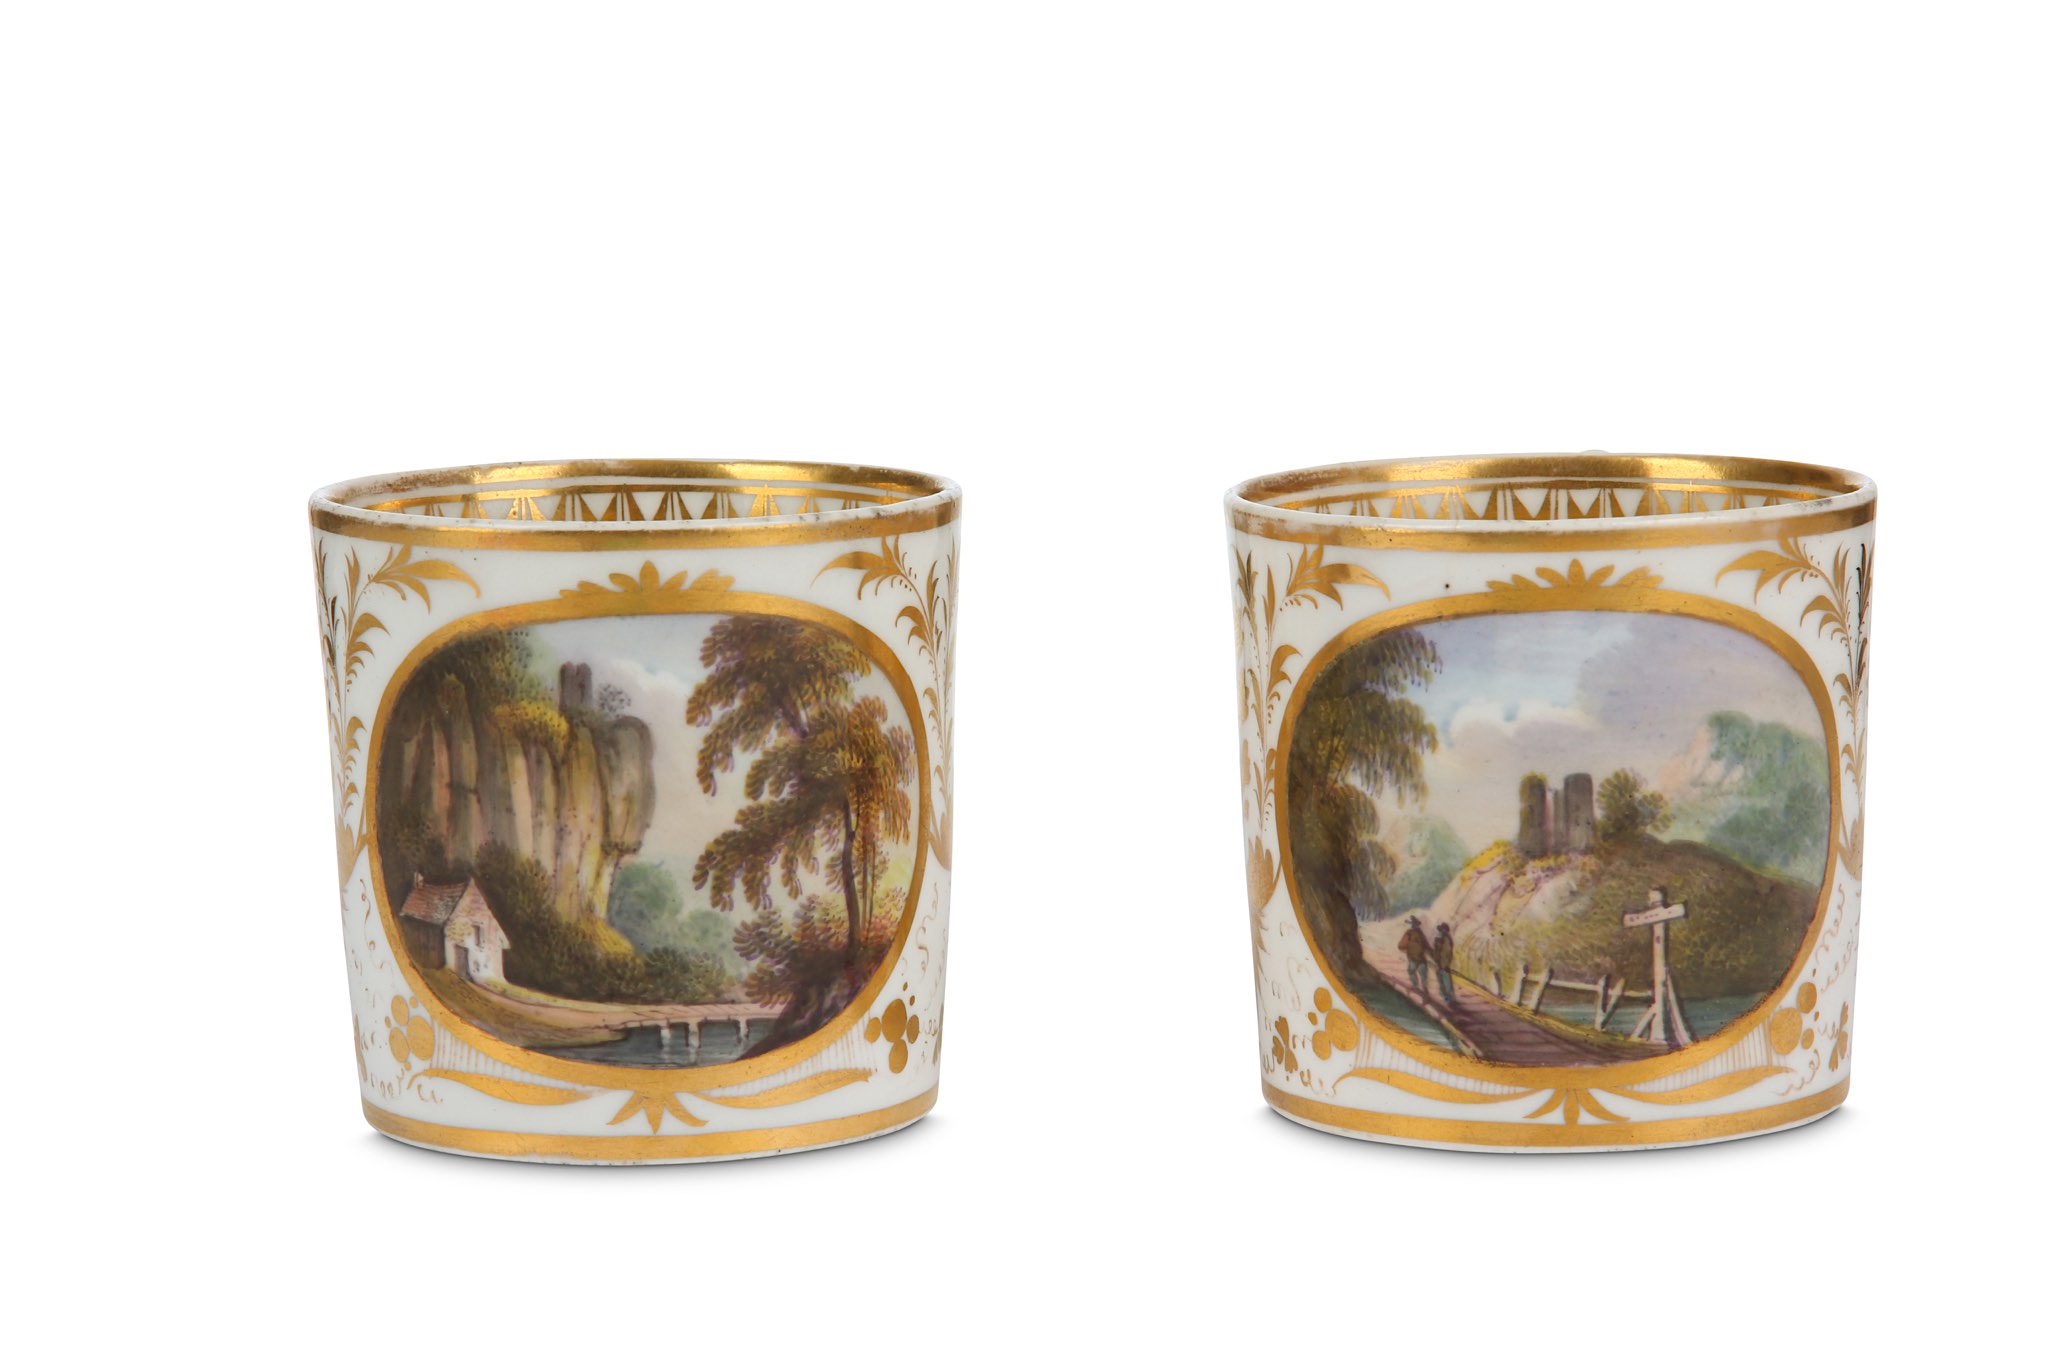 A FINE PAIR OF DERBY PORCELAIN 'NAMED VIEW' COFFEE CANS, circa 1810, both finely painted with